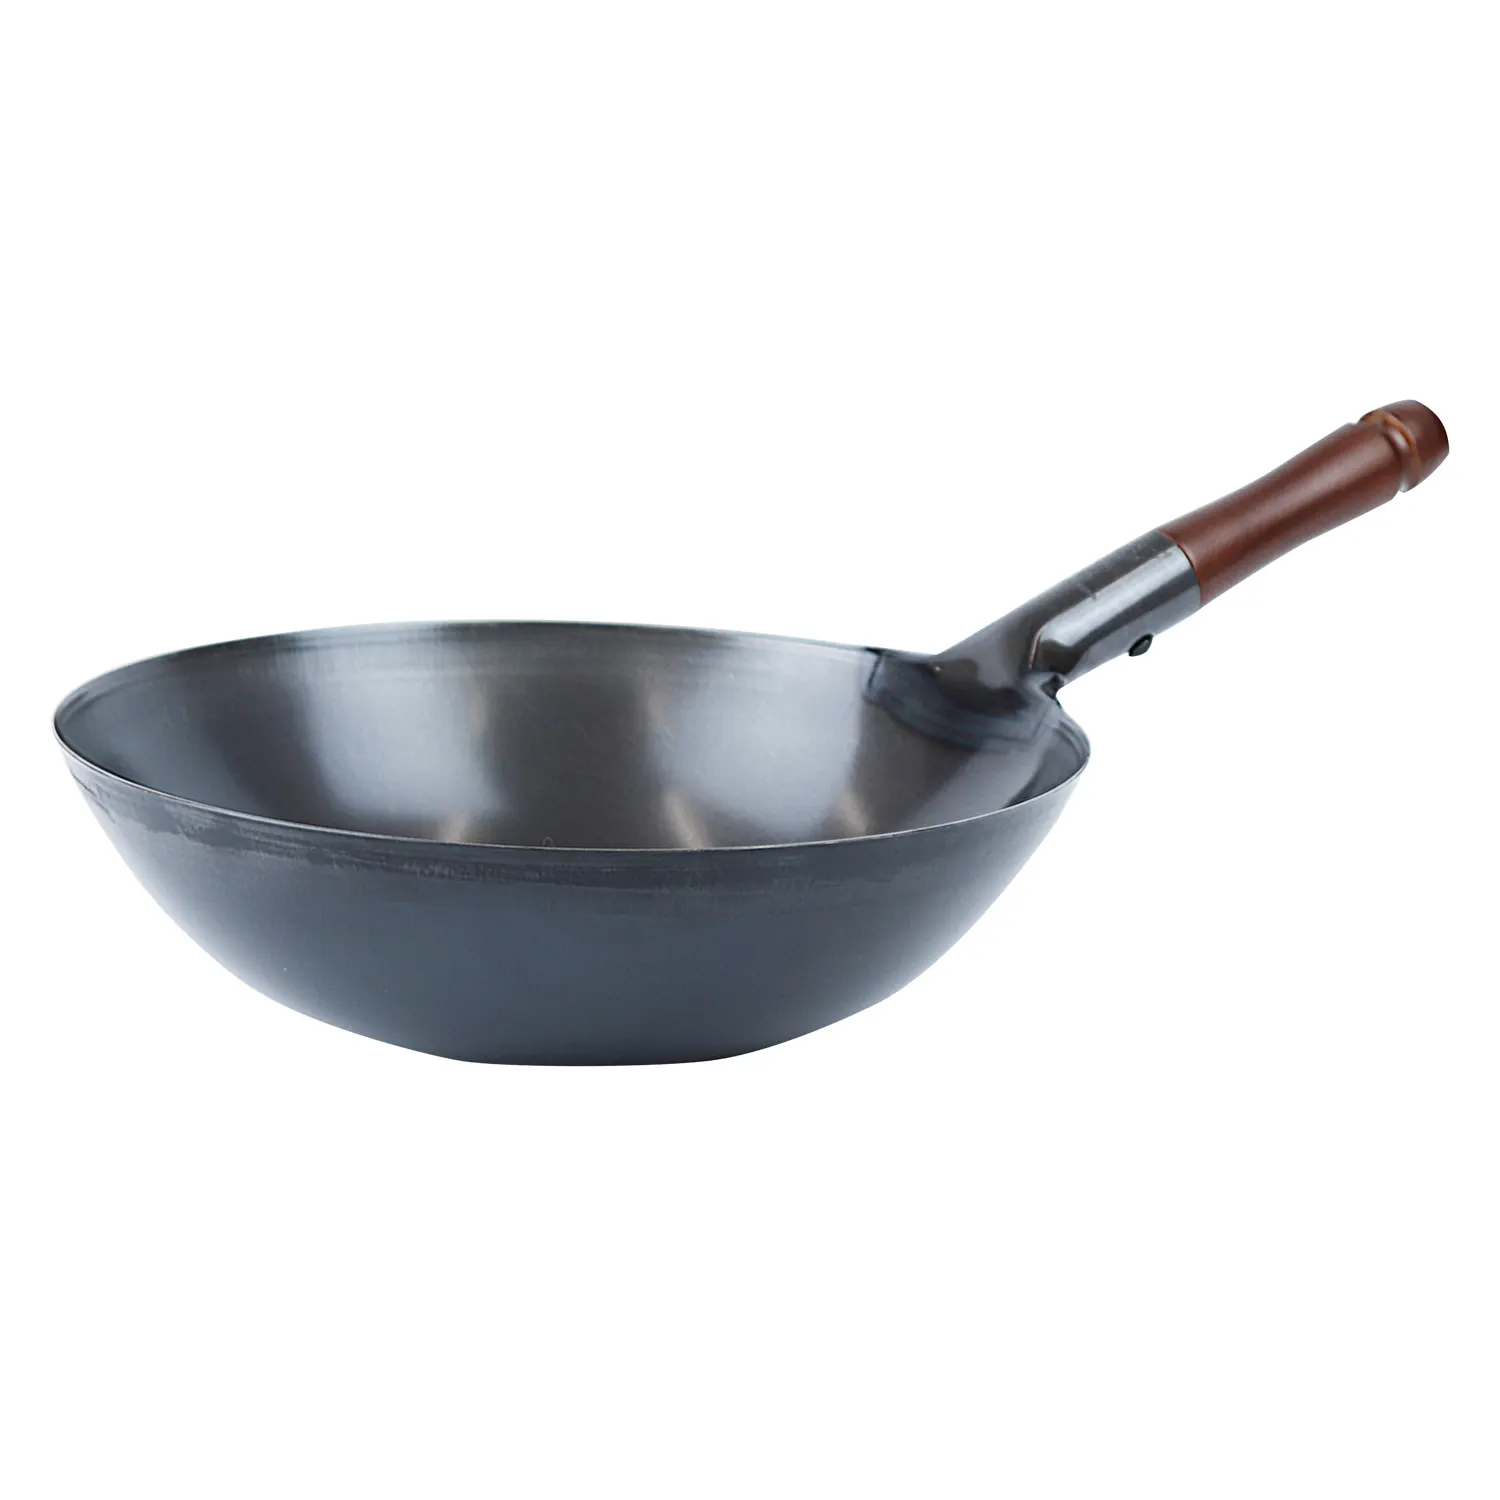 Easy to frying superior iron made 1280g/2.82lb Japanese cast iron wok chinese fry pan with handles